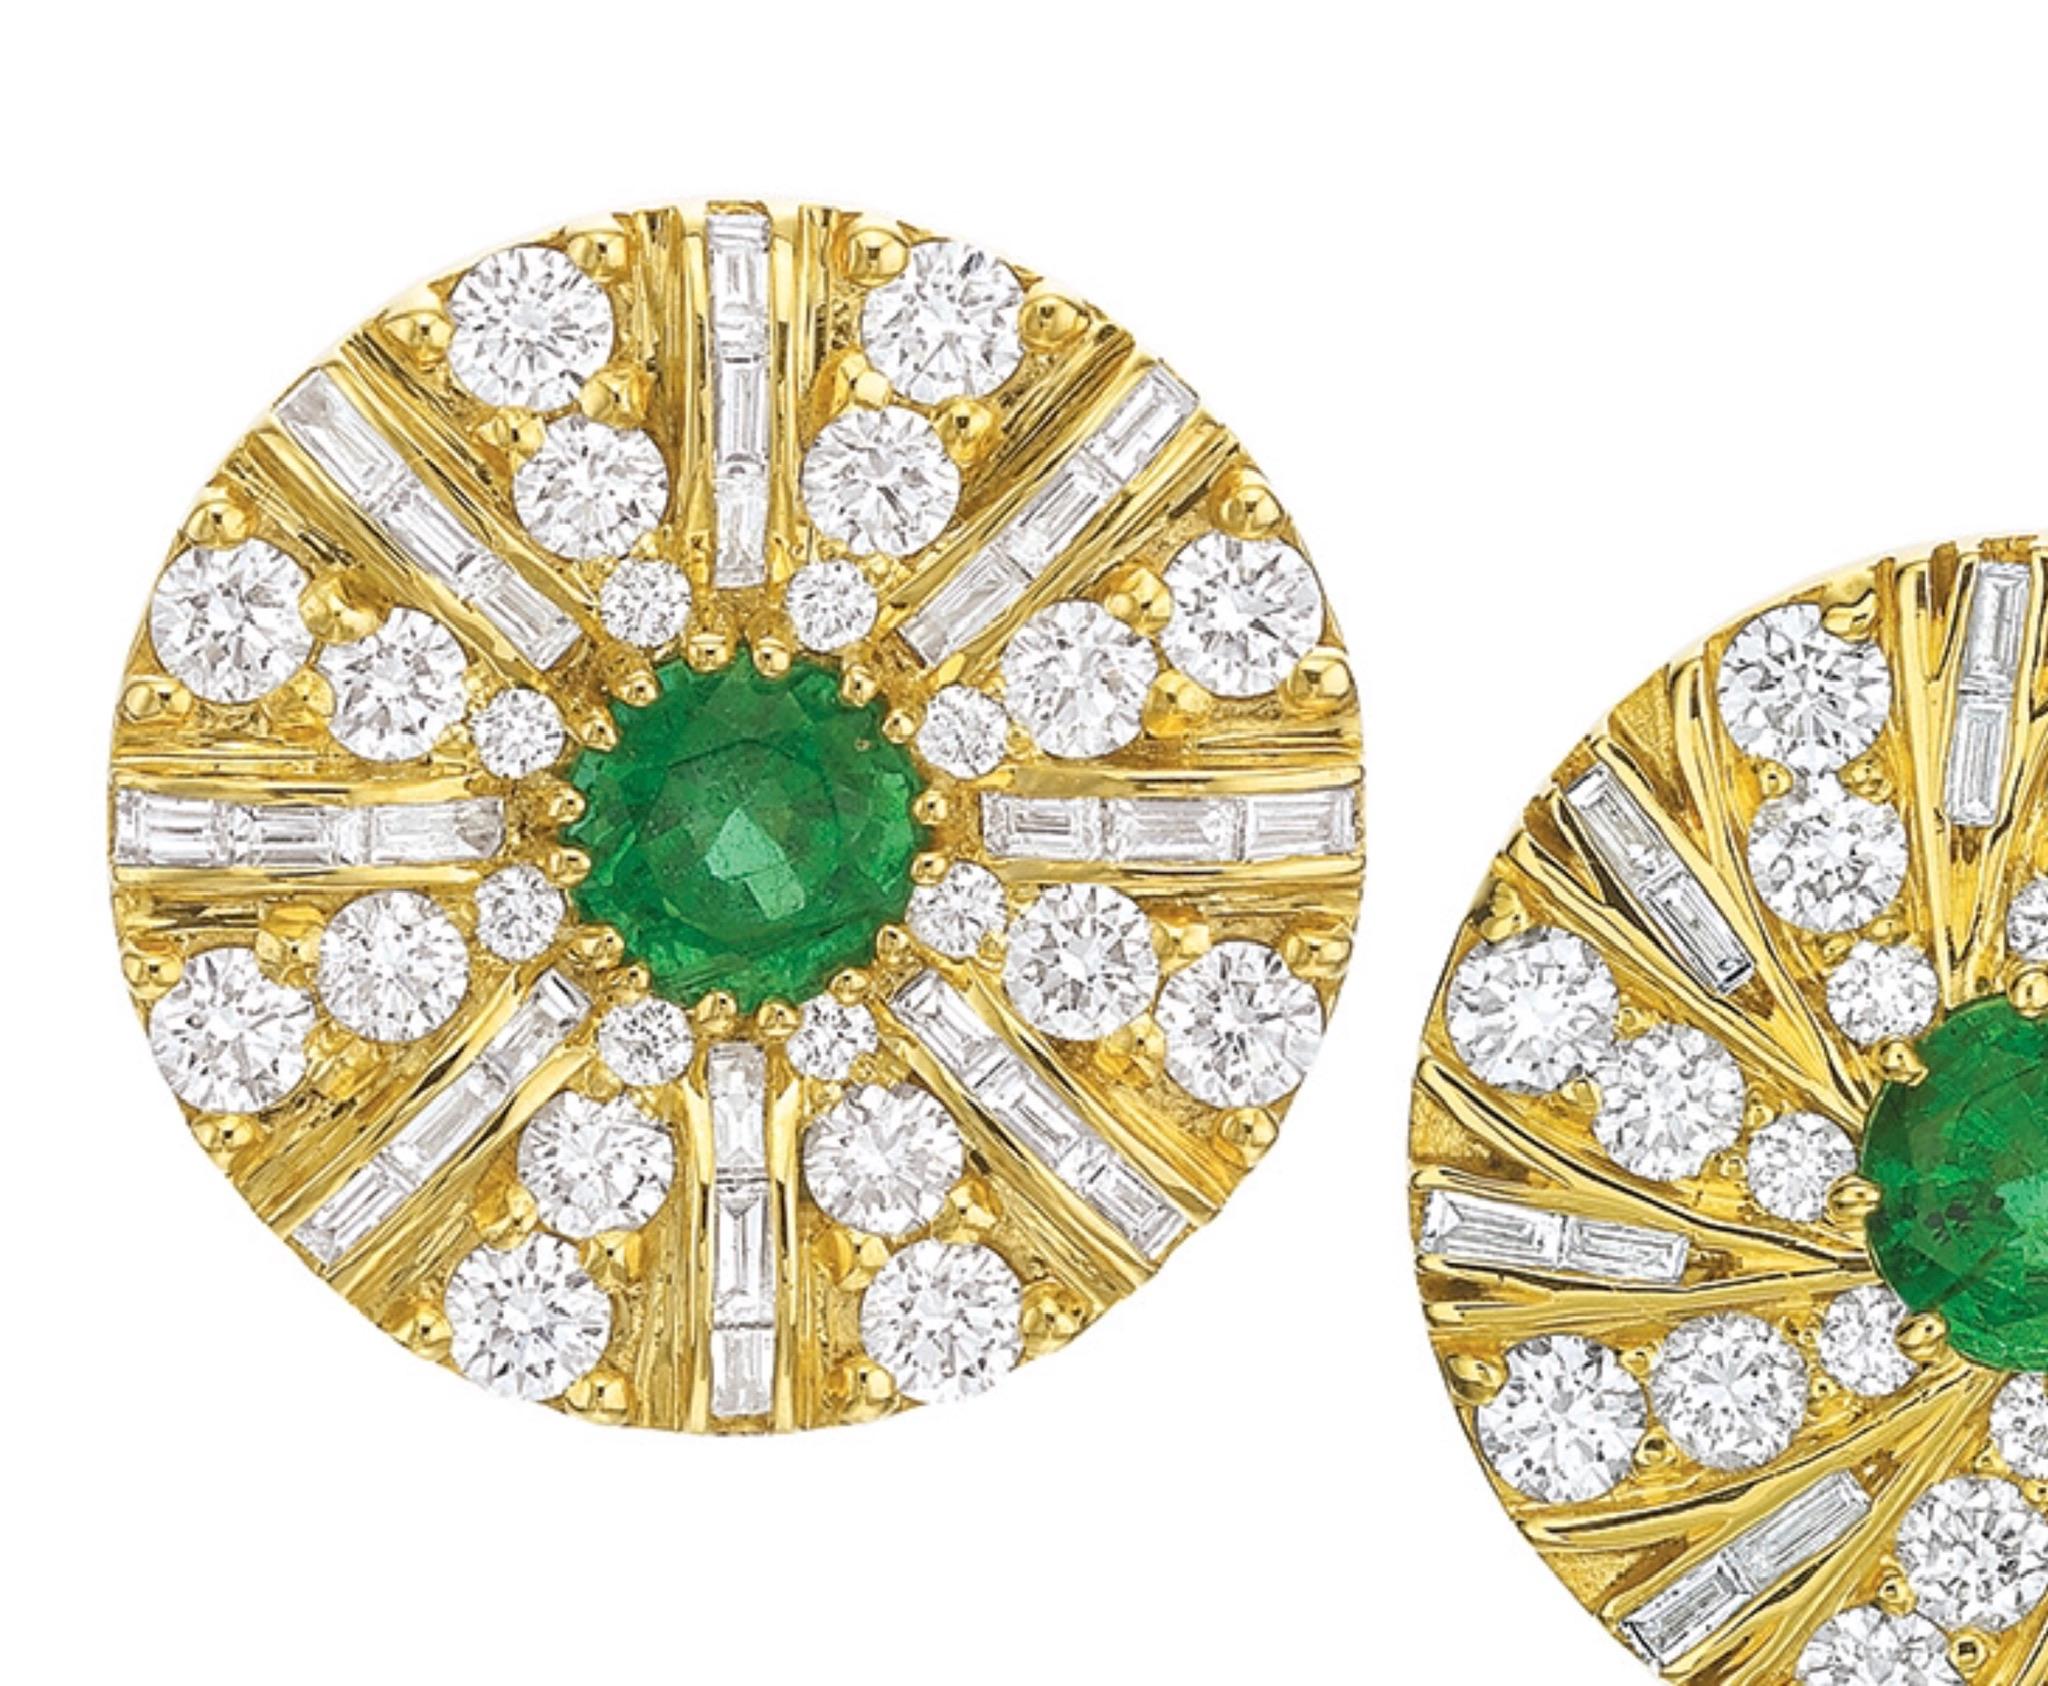 From Andrew Glassford's evolving Shazam Series are a great looking pair of 1.24 ctw Columbian Emeralds surrounds by Diamonds. The Diamonds consists of .48 ctw of GH VS Baguette Diamonds and 1.94 ctw of GH VSI round diamonds. The earrings are